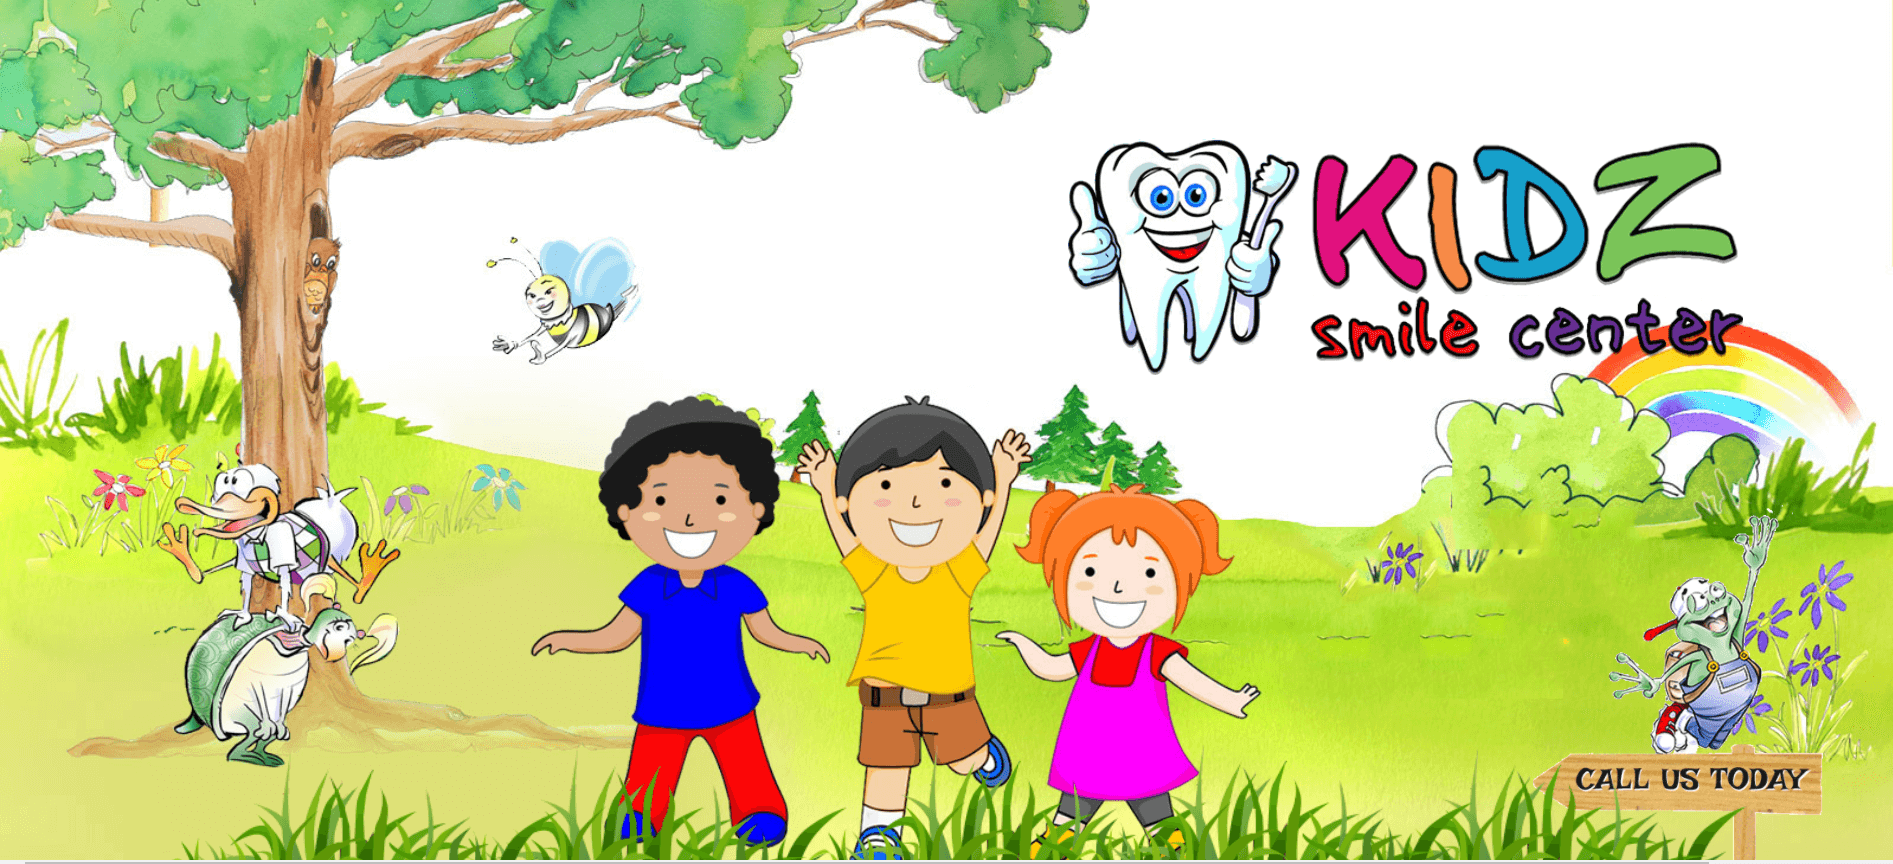 website for pediatric dental clinic example